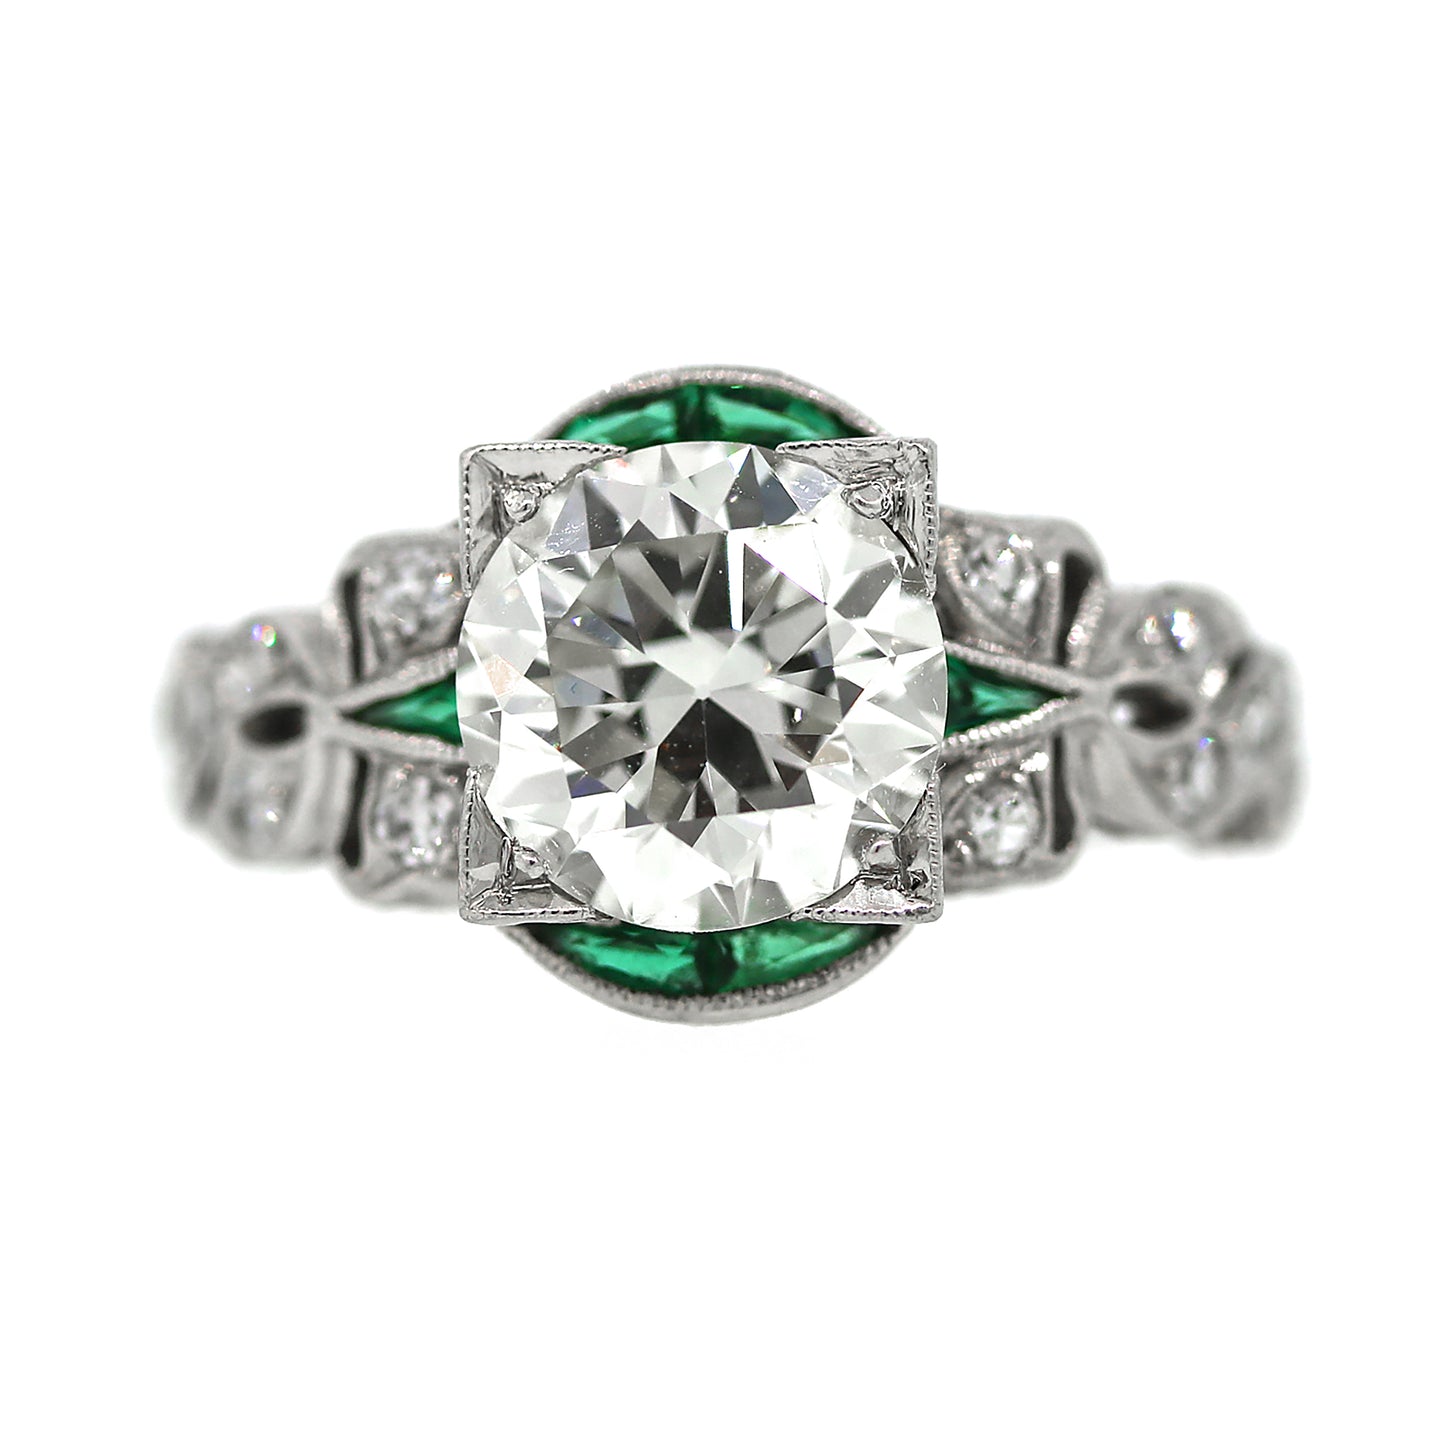 Load image into Gallery viewer, Platinum Art Deco Round Diamond Engagement Ring Size 6.25
